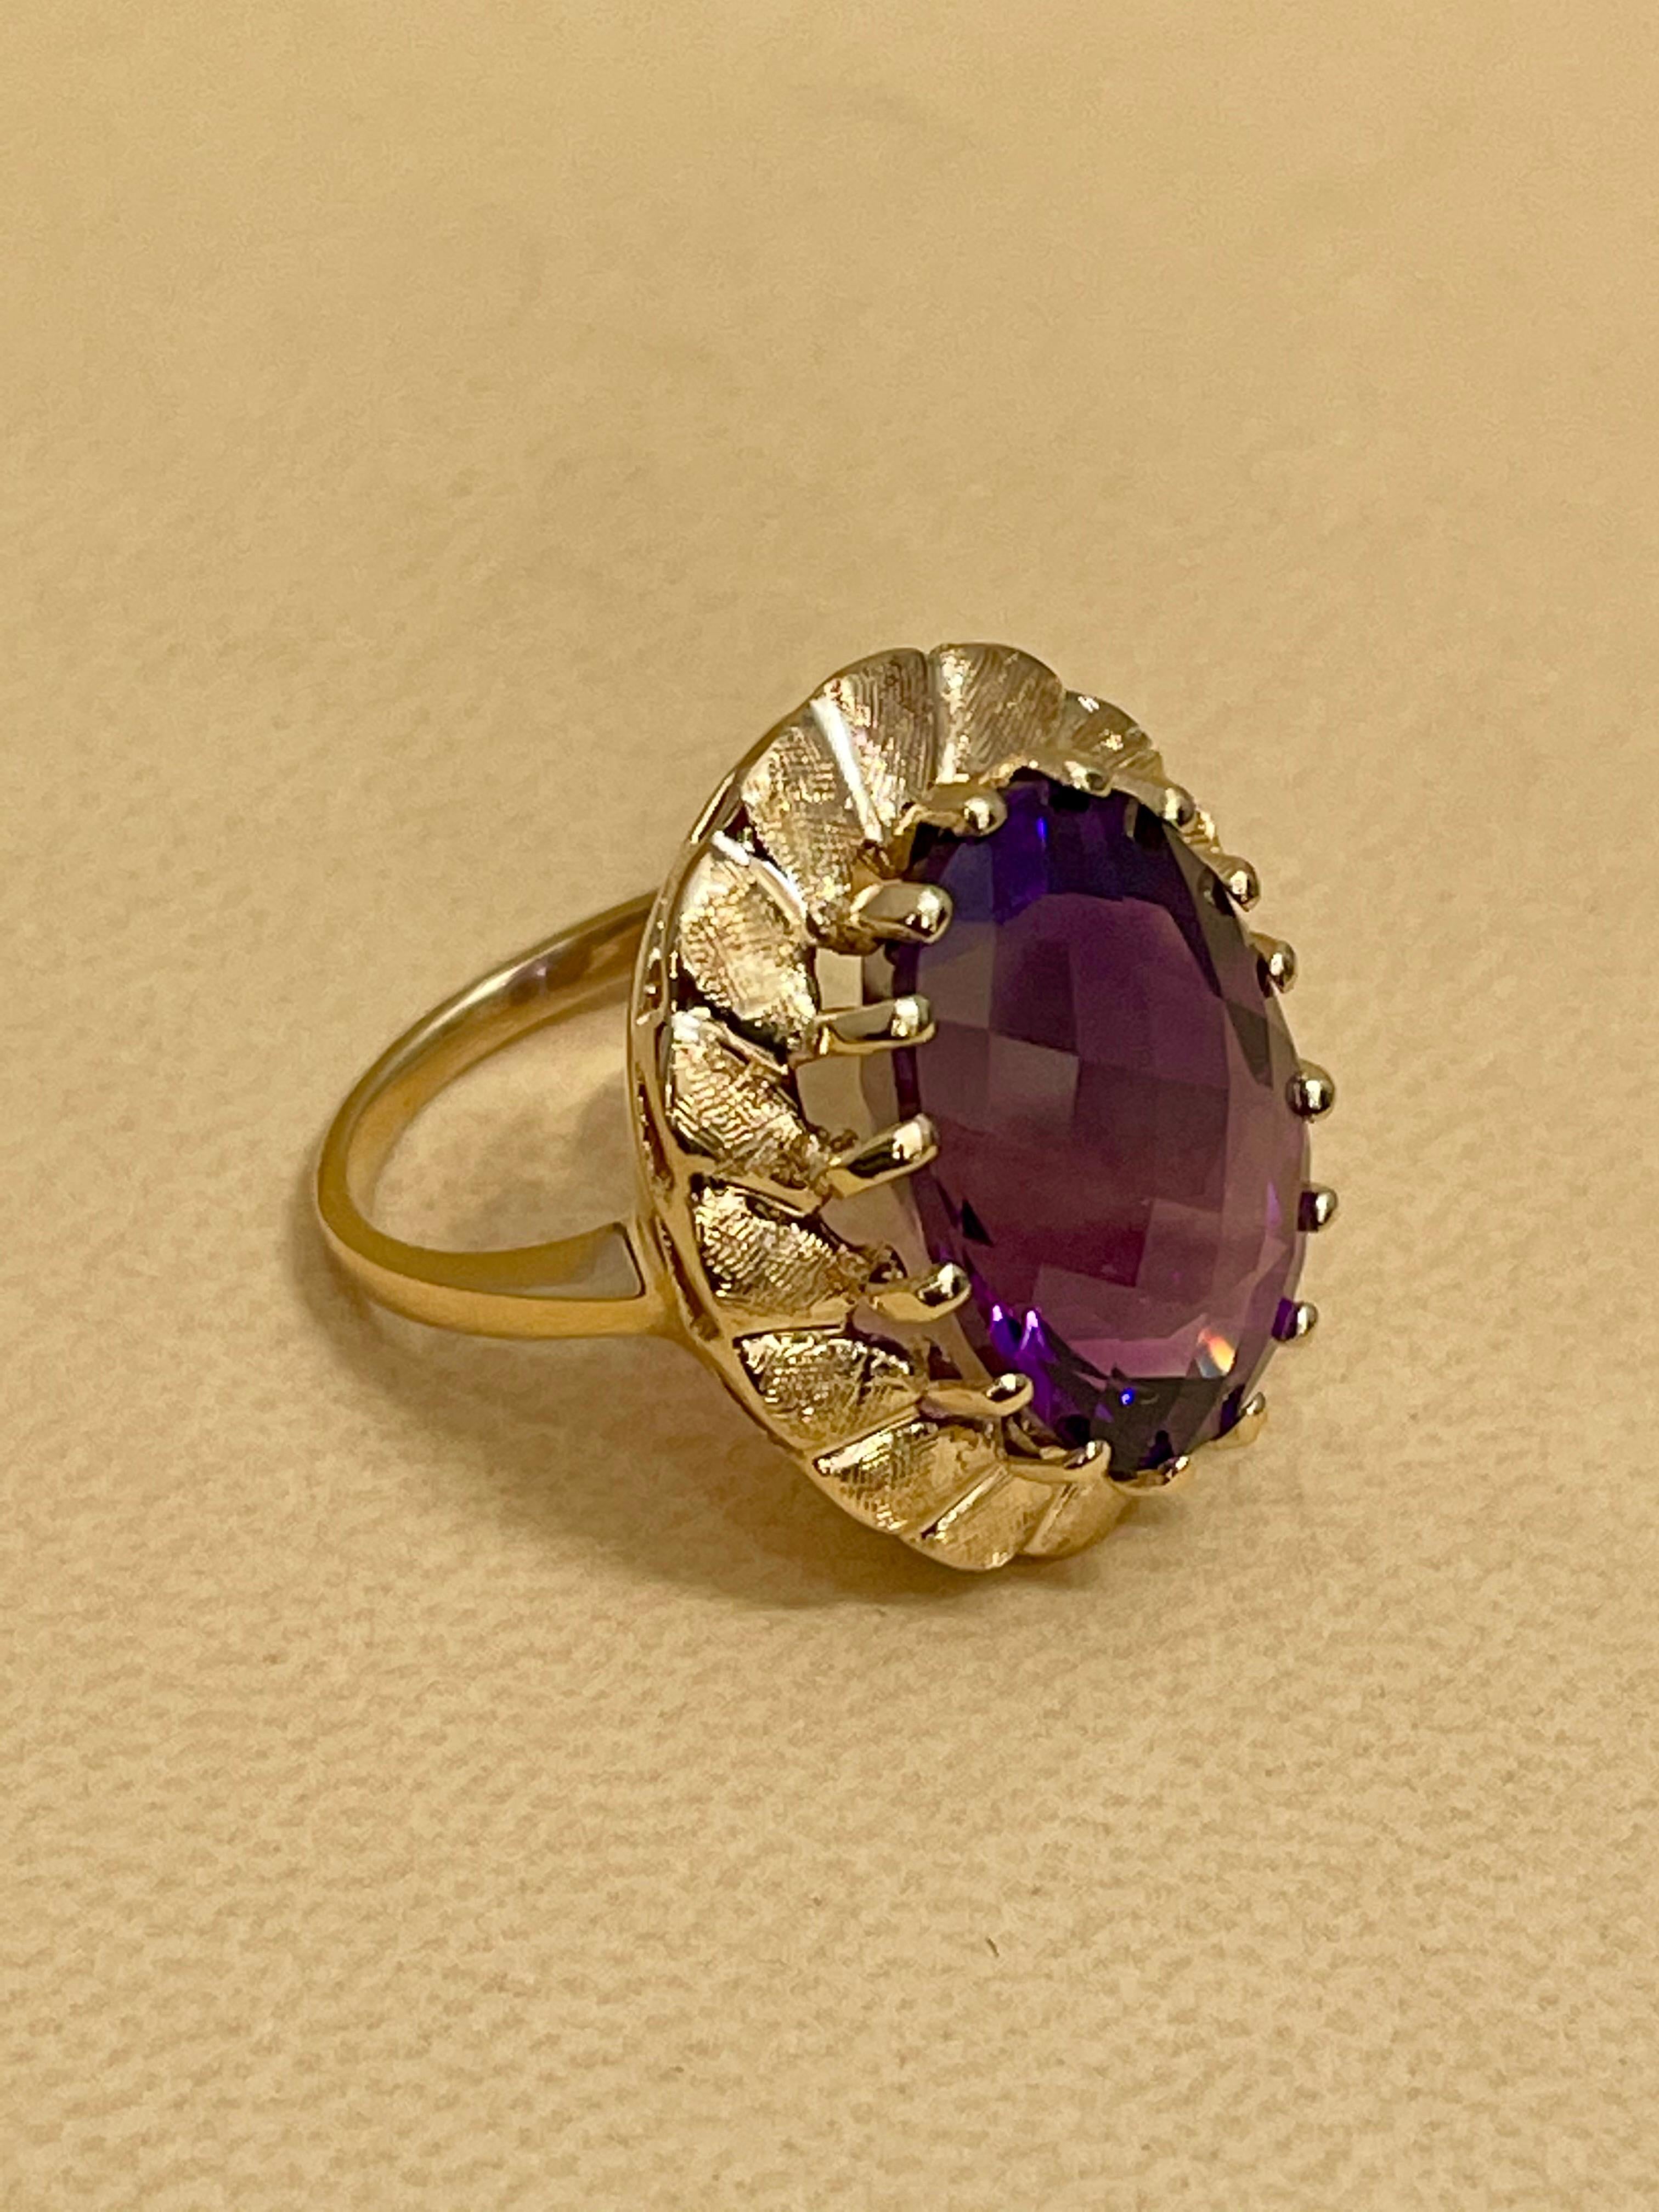 10 Carat Checker Board Amethyst Cocktail Ring in 14 Karat Yellow Gold For Sale 2